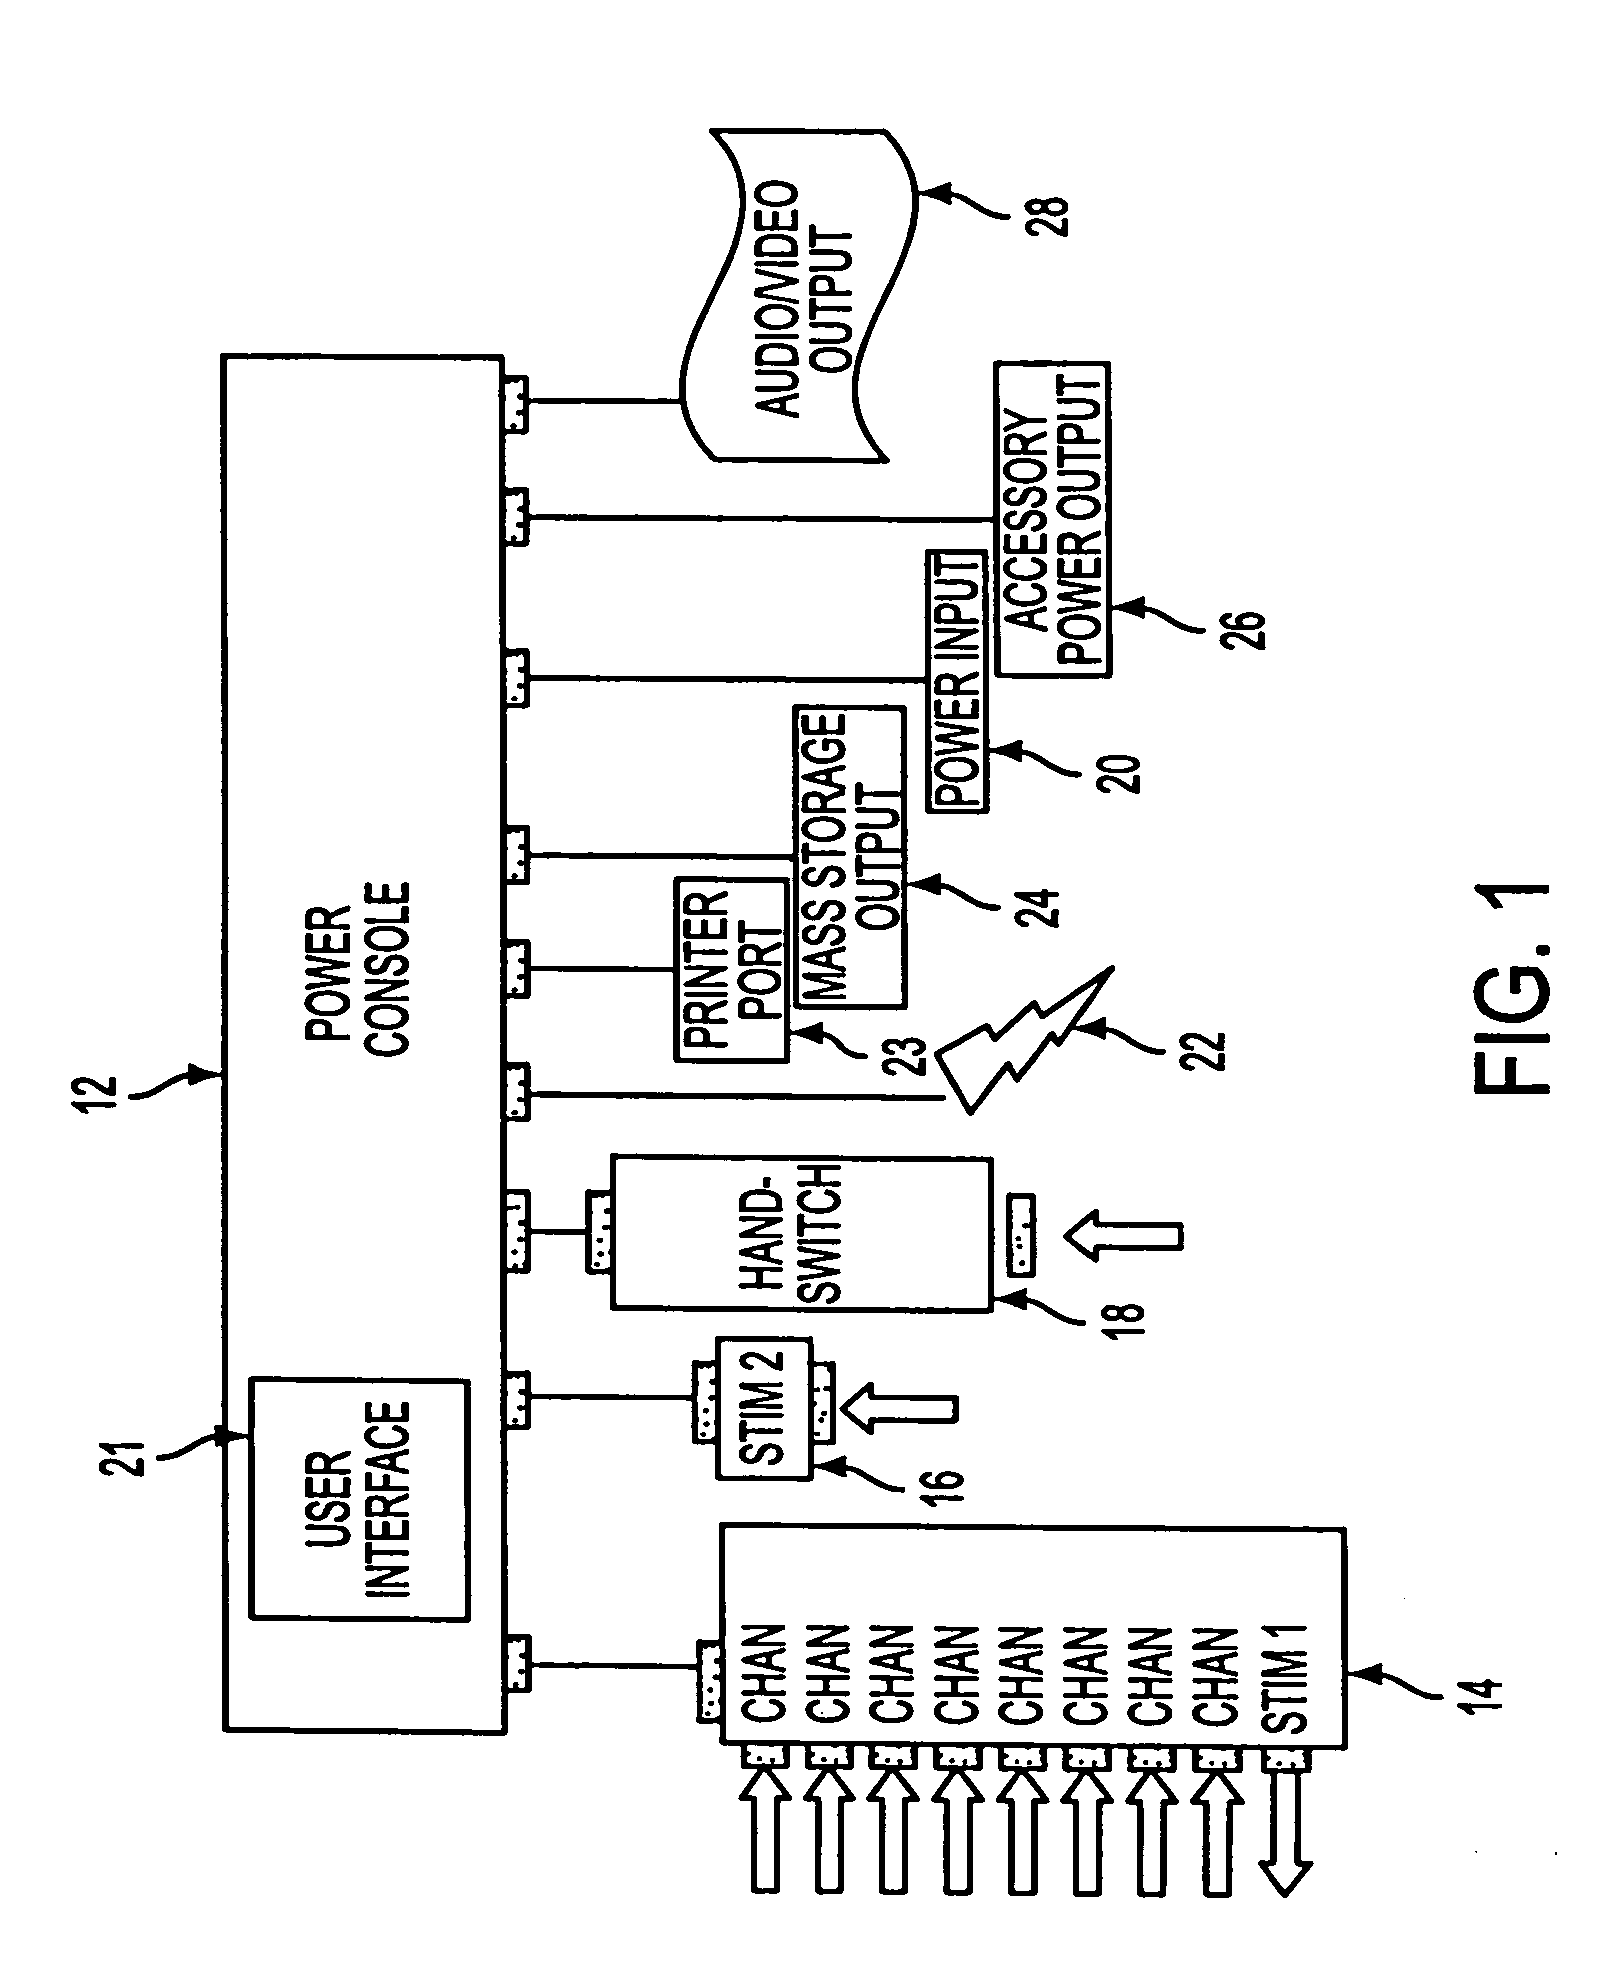 Apparatus for intraoperative neural monitoring